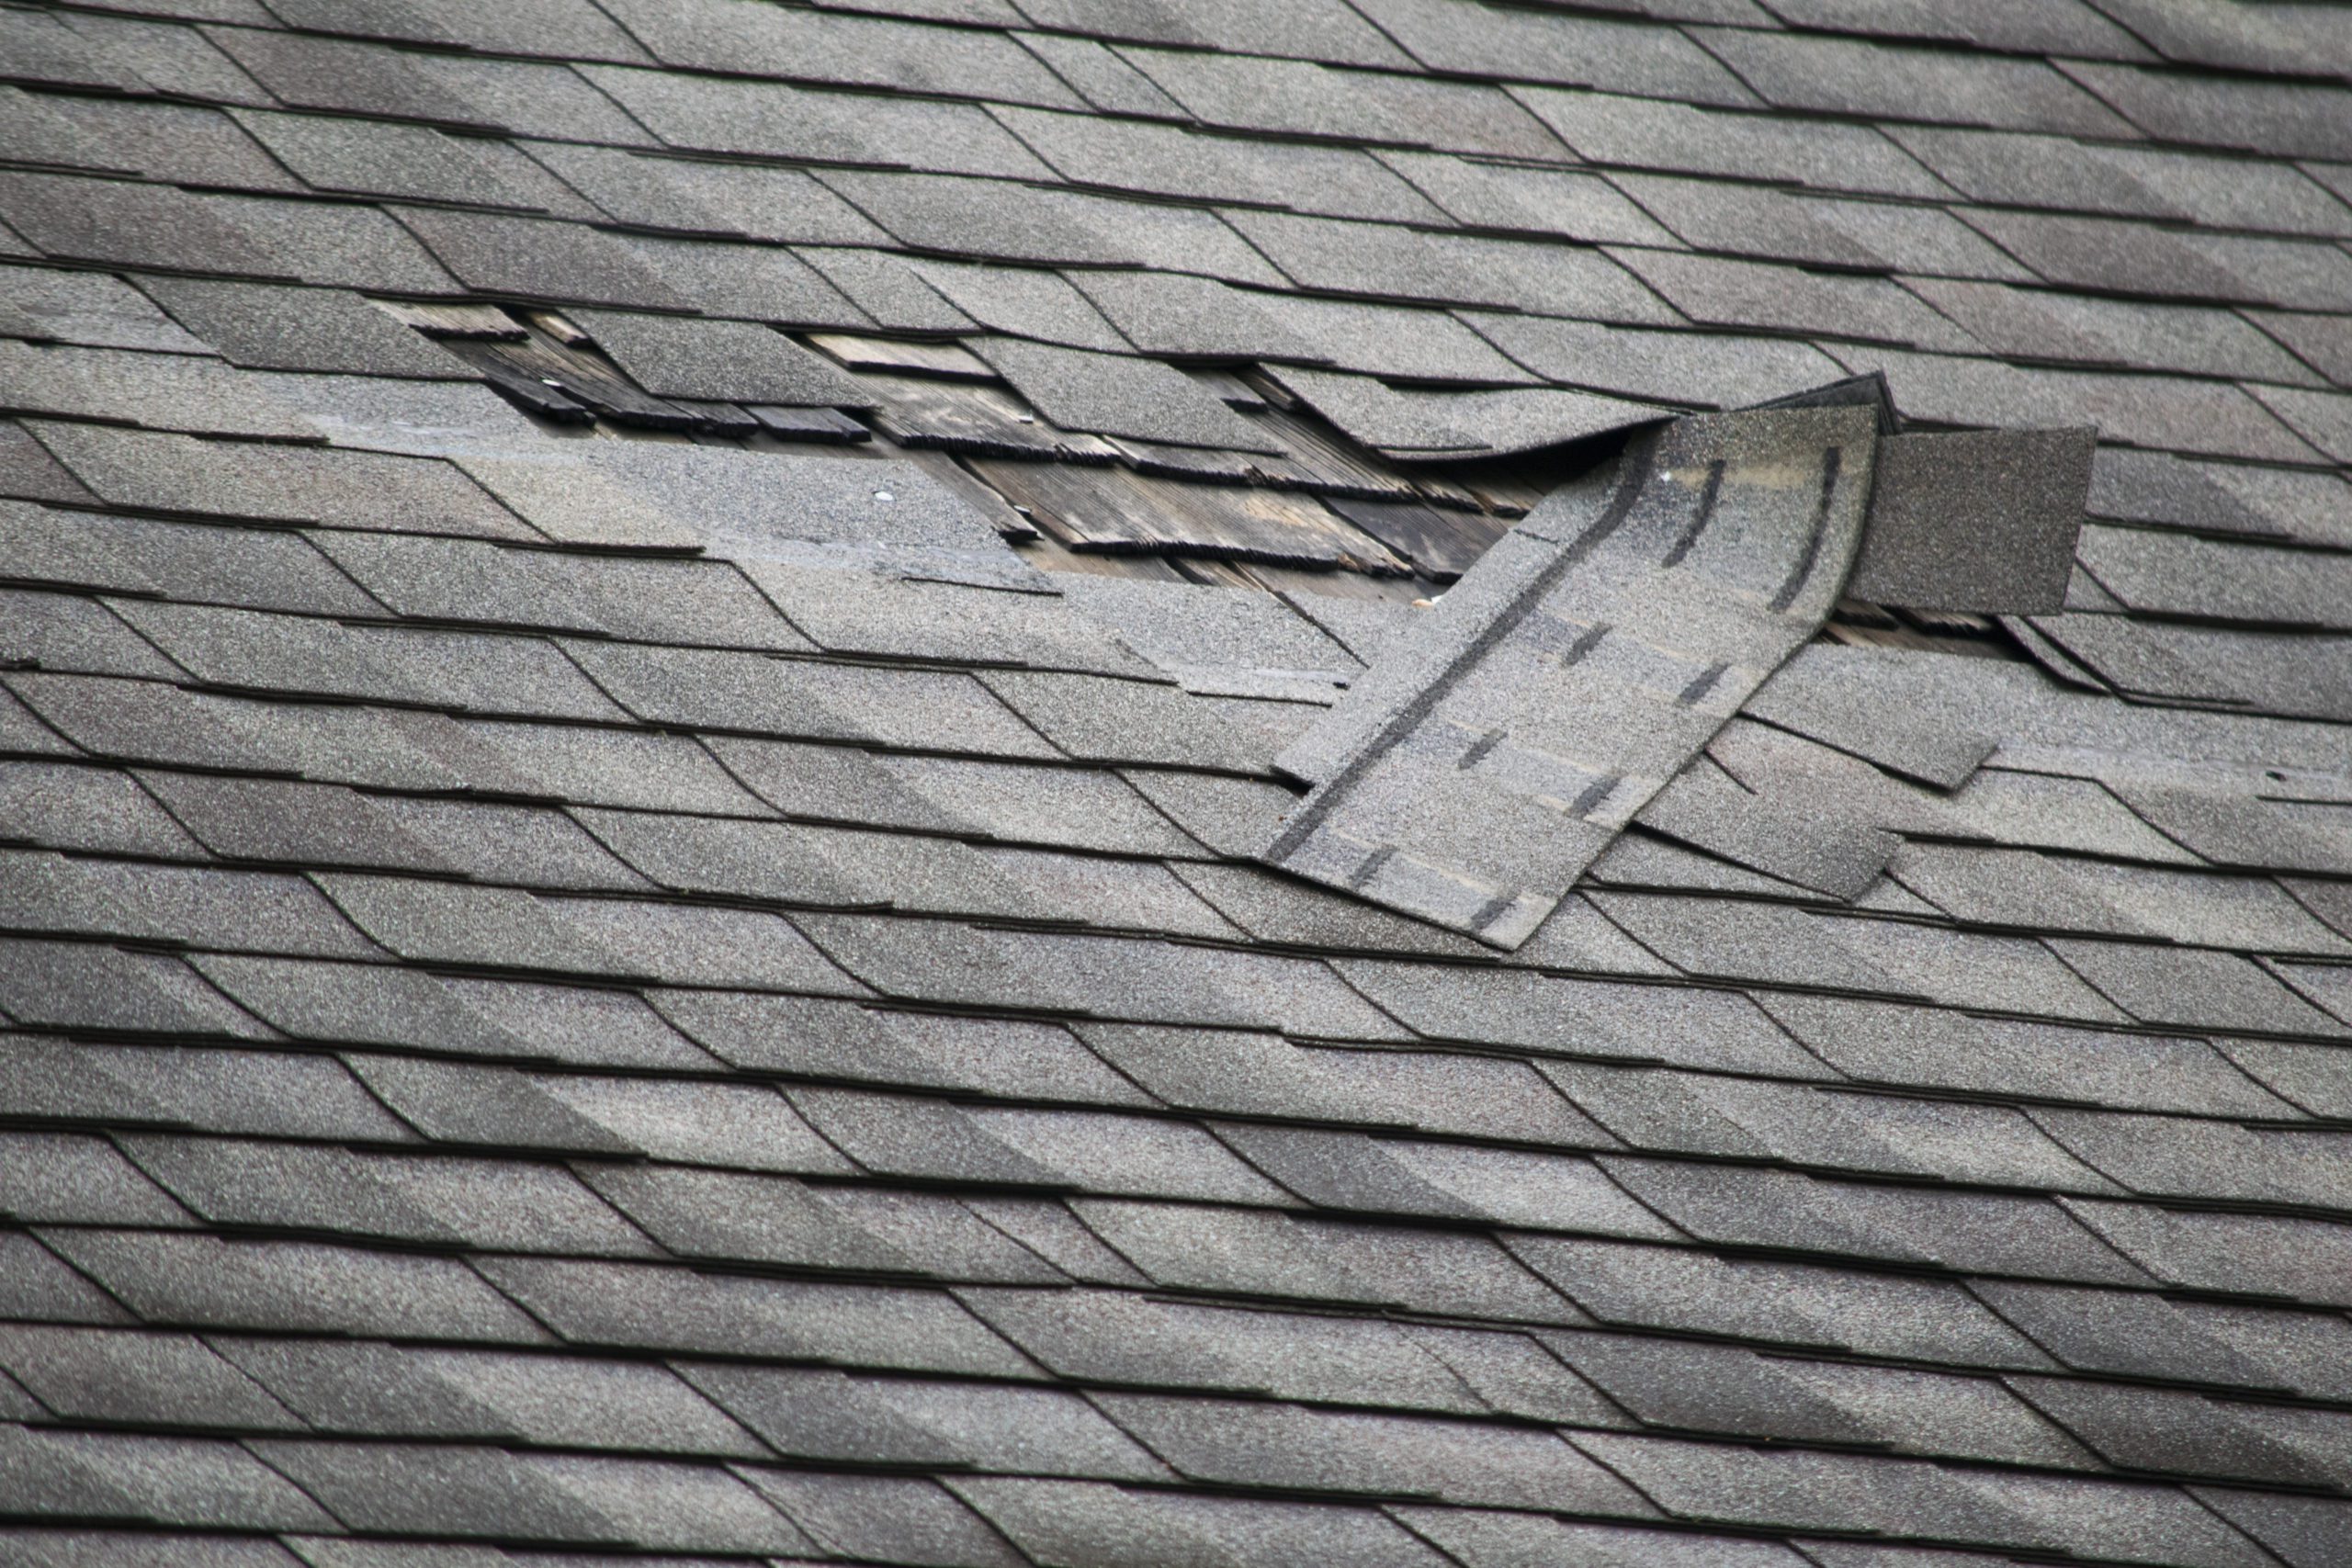 How do I know if my roof needs to be replaced?